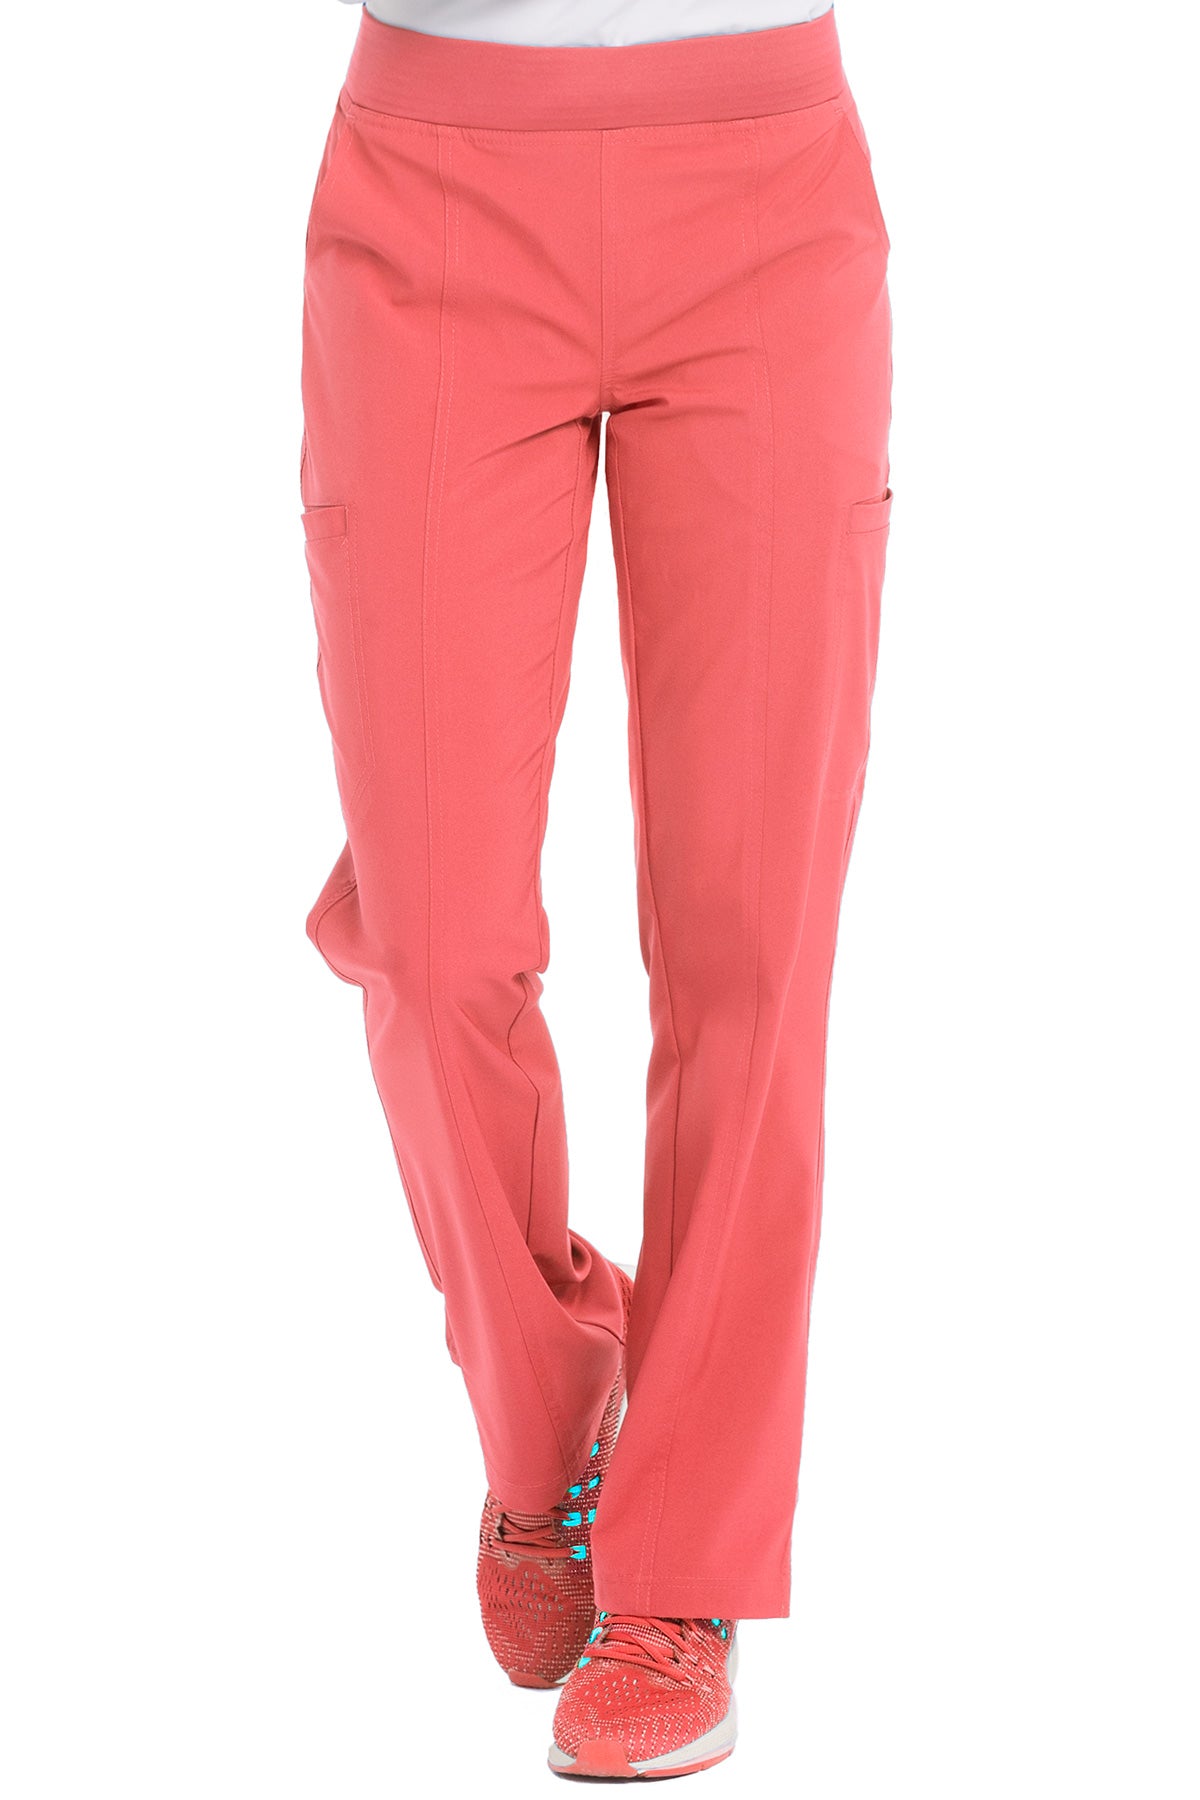 Yoga 2 Cargo Pocket Pant by Med Couture (Tall) XS-5XL / Coral